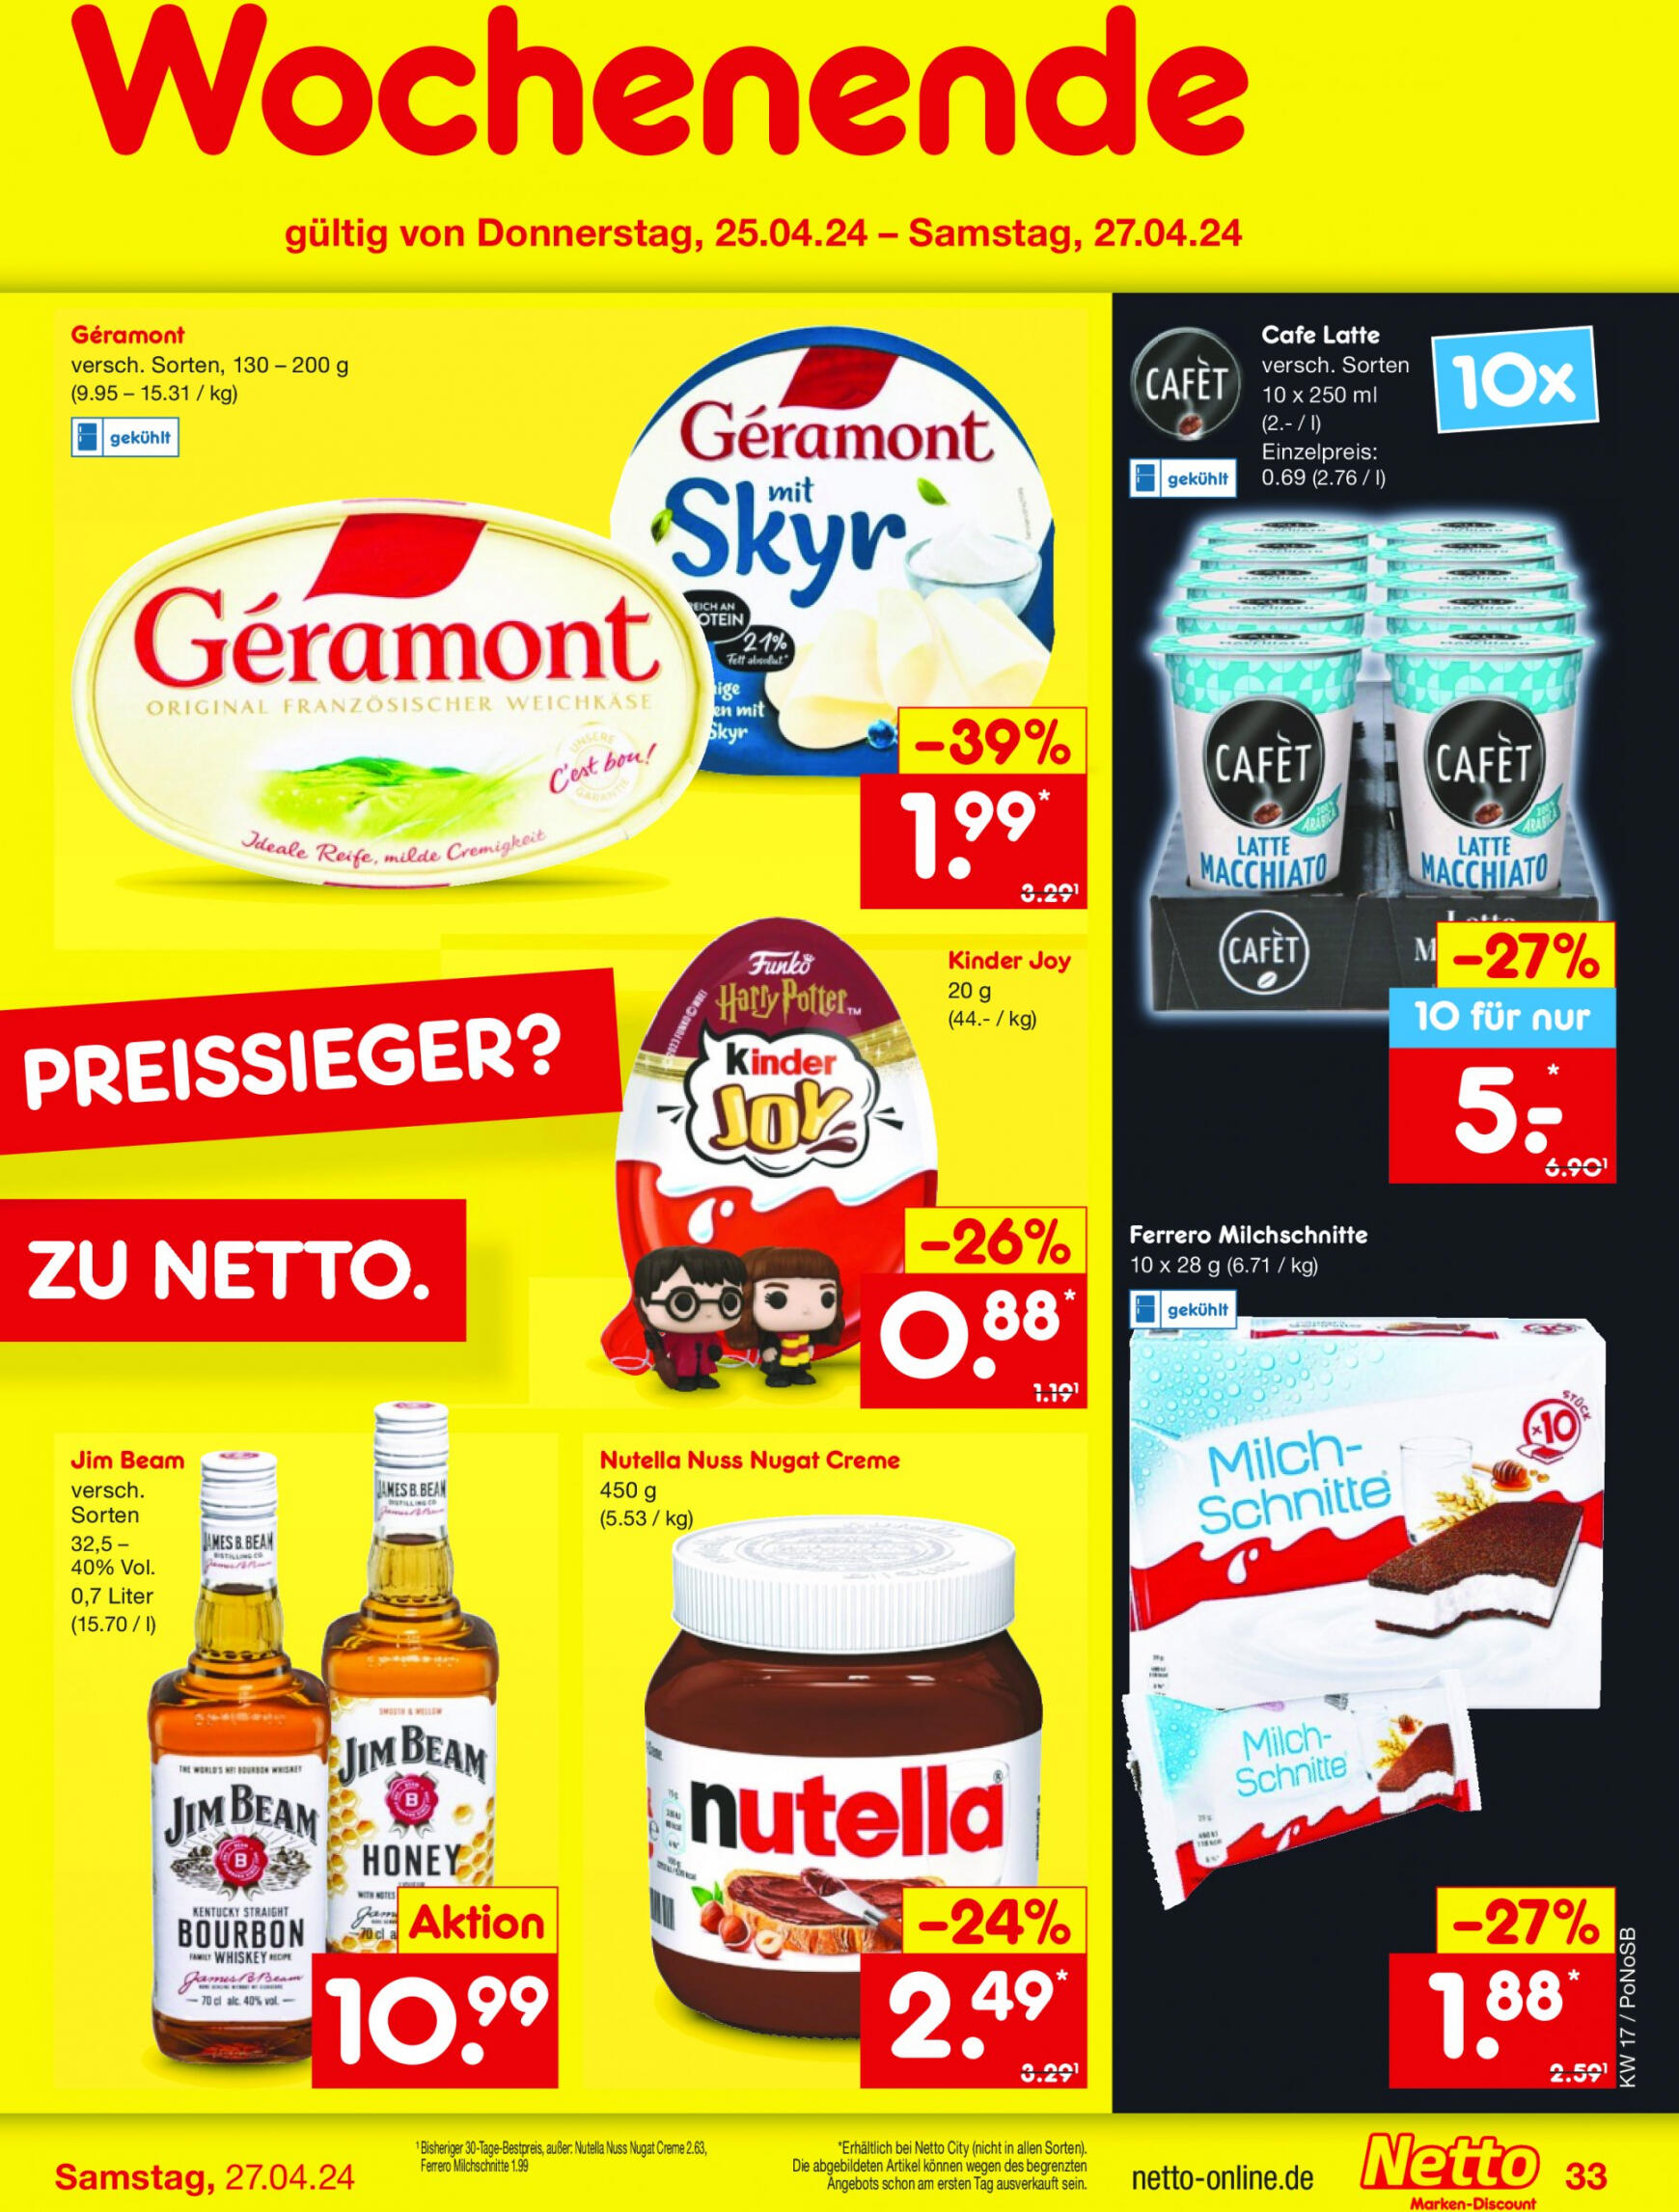 netto - Flyer Netto aktuell 22.04. - 27.04. - page: 39